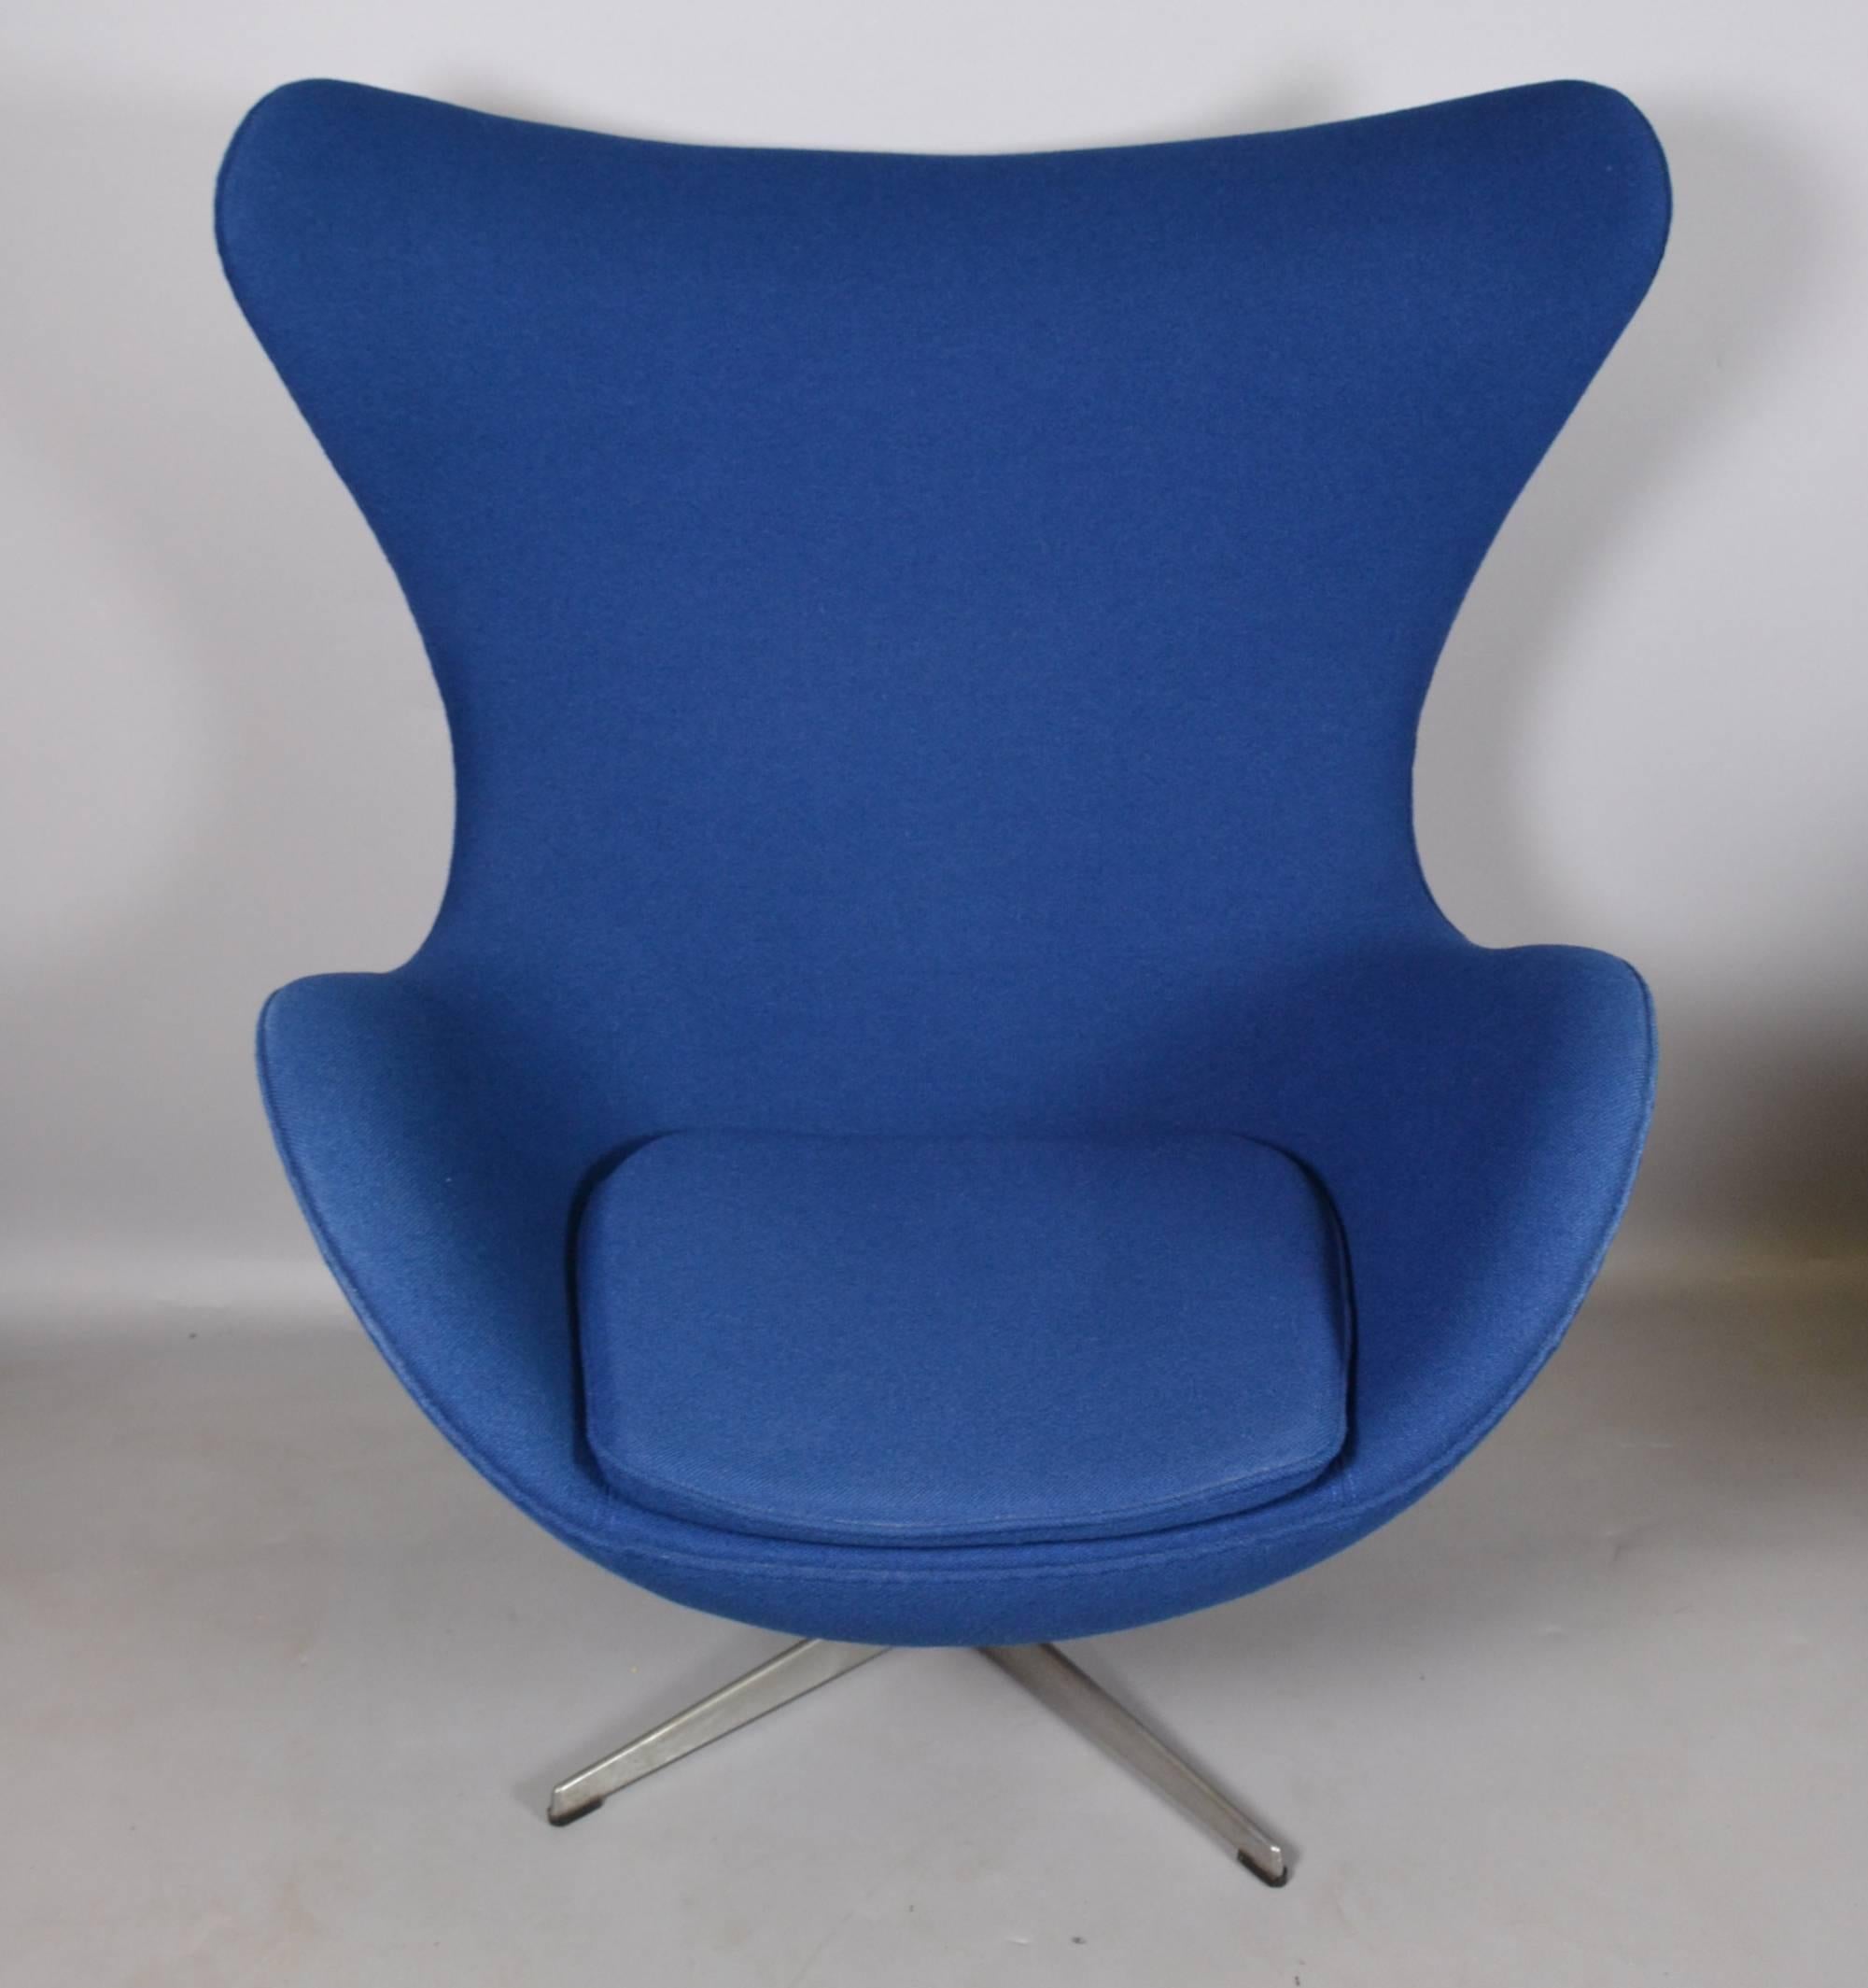 Designed by Arne Jacobsen in 1958, produced by Fritz Hansen before 1975. Original chair from the first production upholstery in blue fabric.